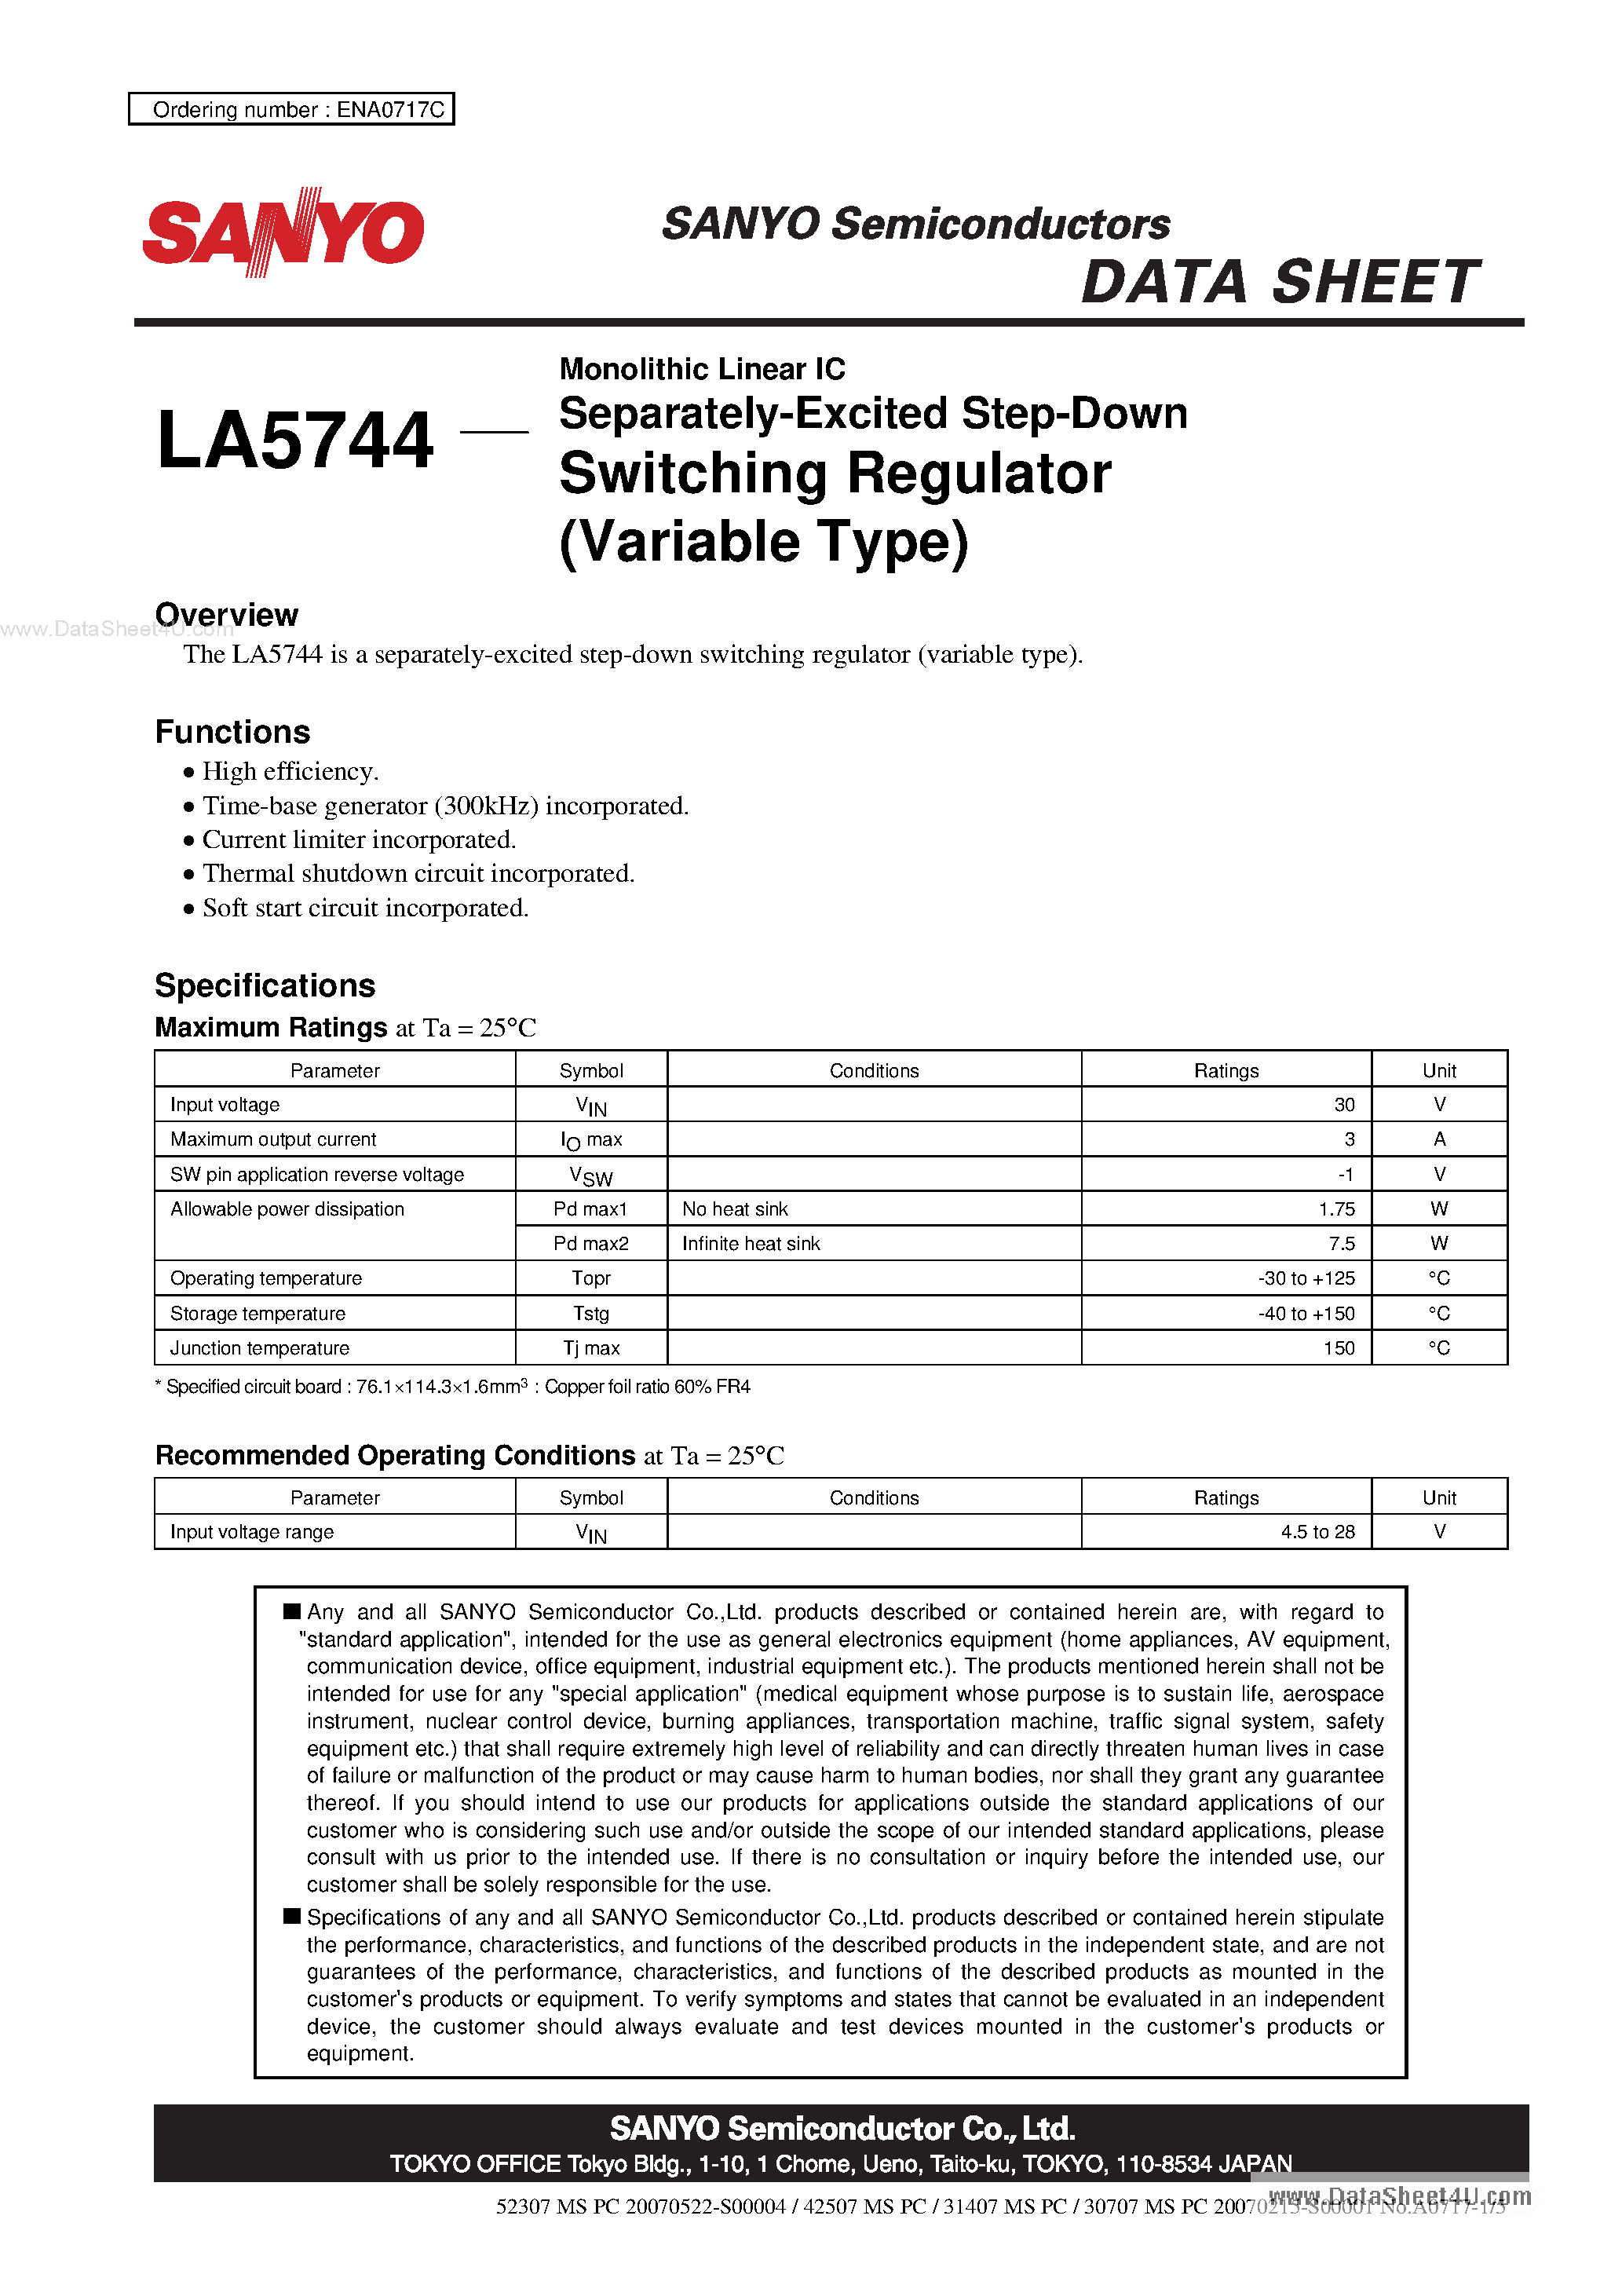 Datasheet LA5744 - Monolithic Linear IC Separately-Excited Step-Down Switching Regulator page 1